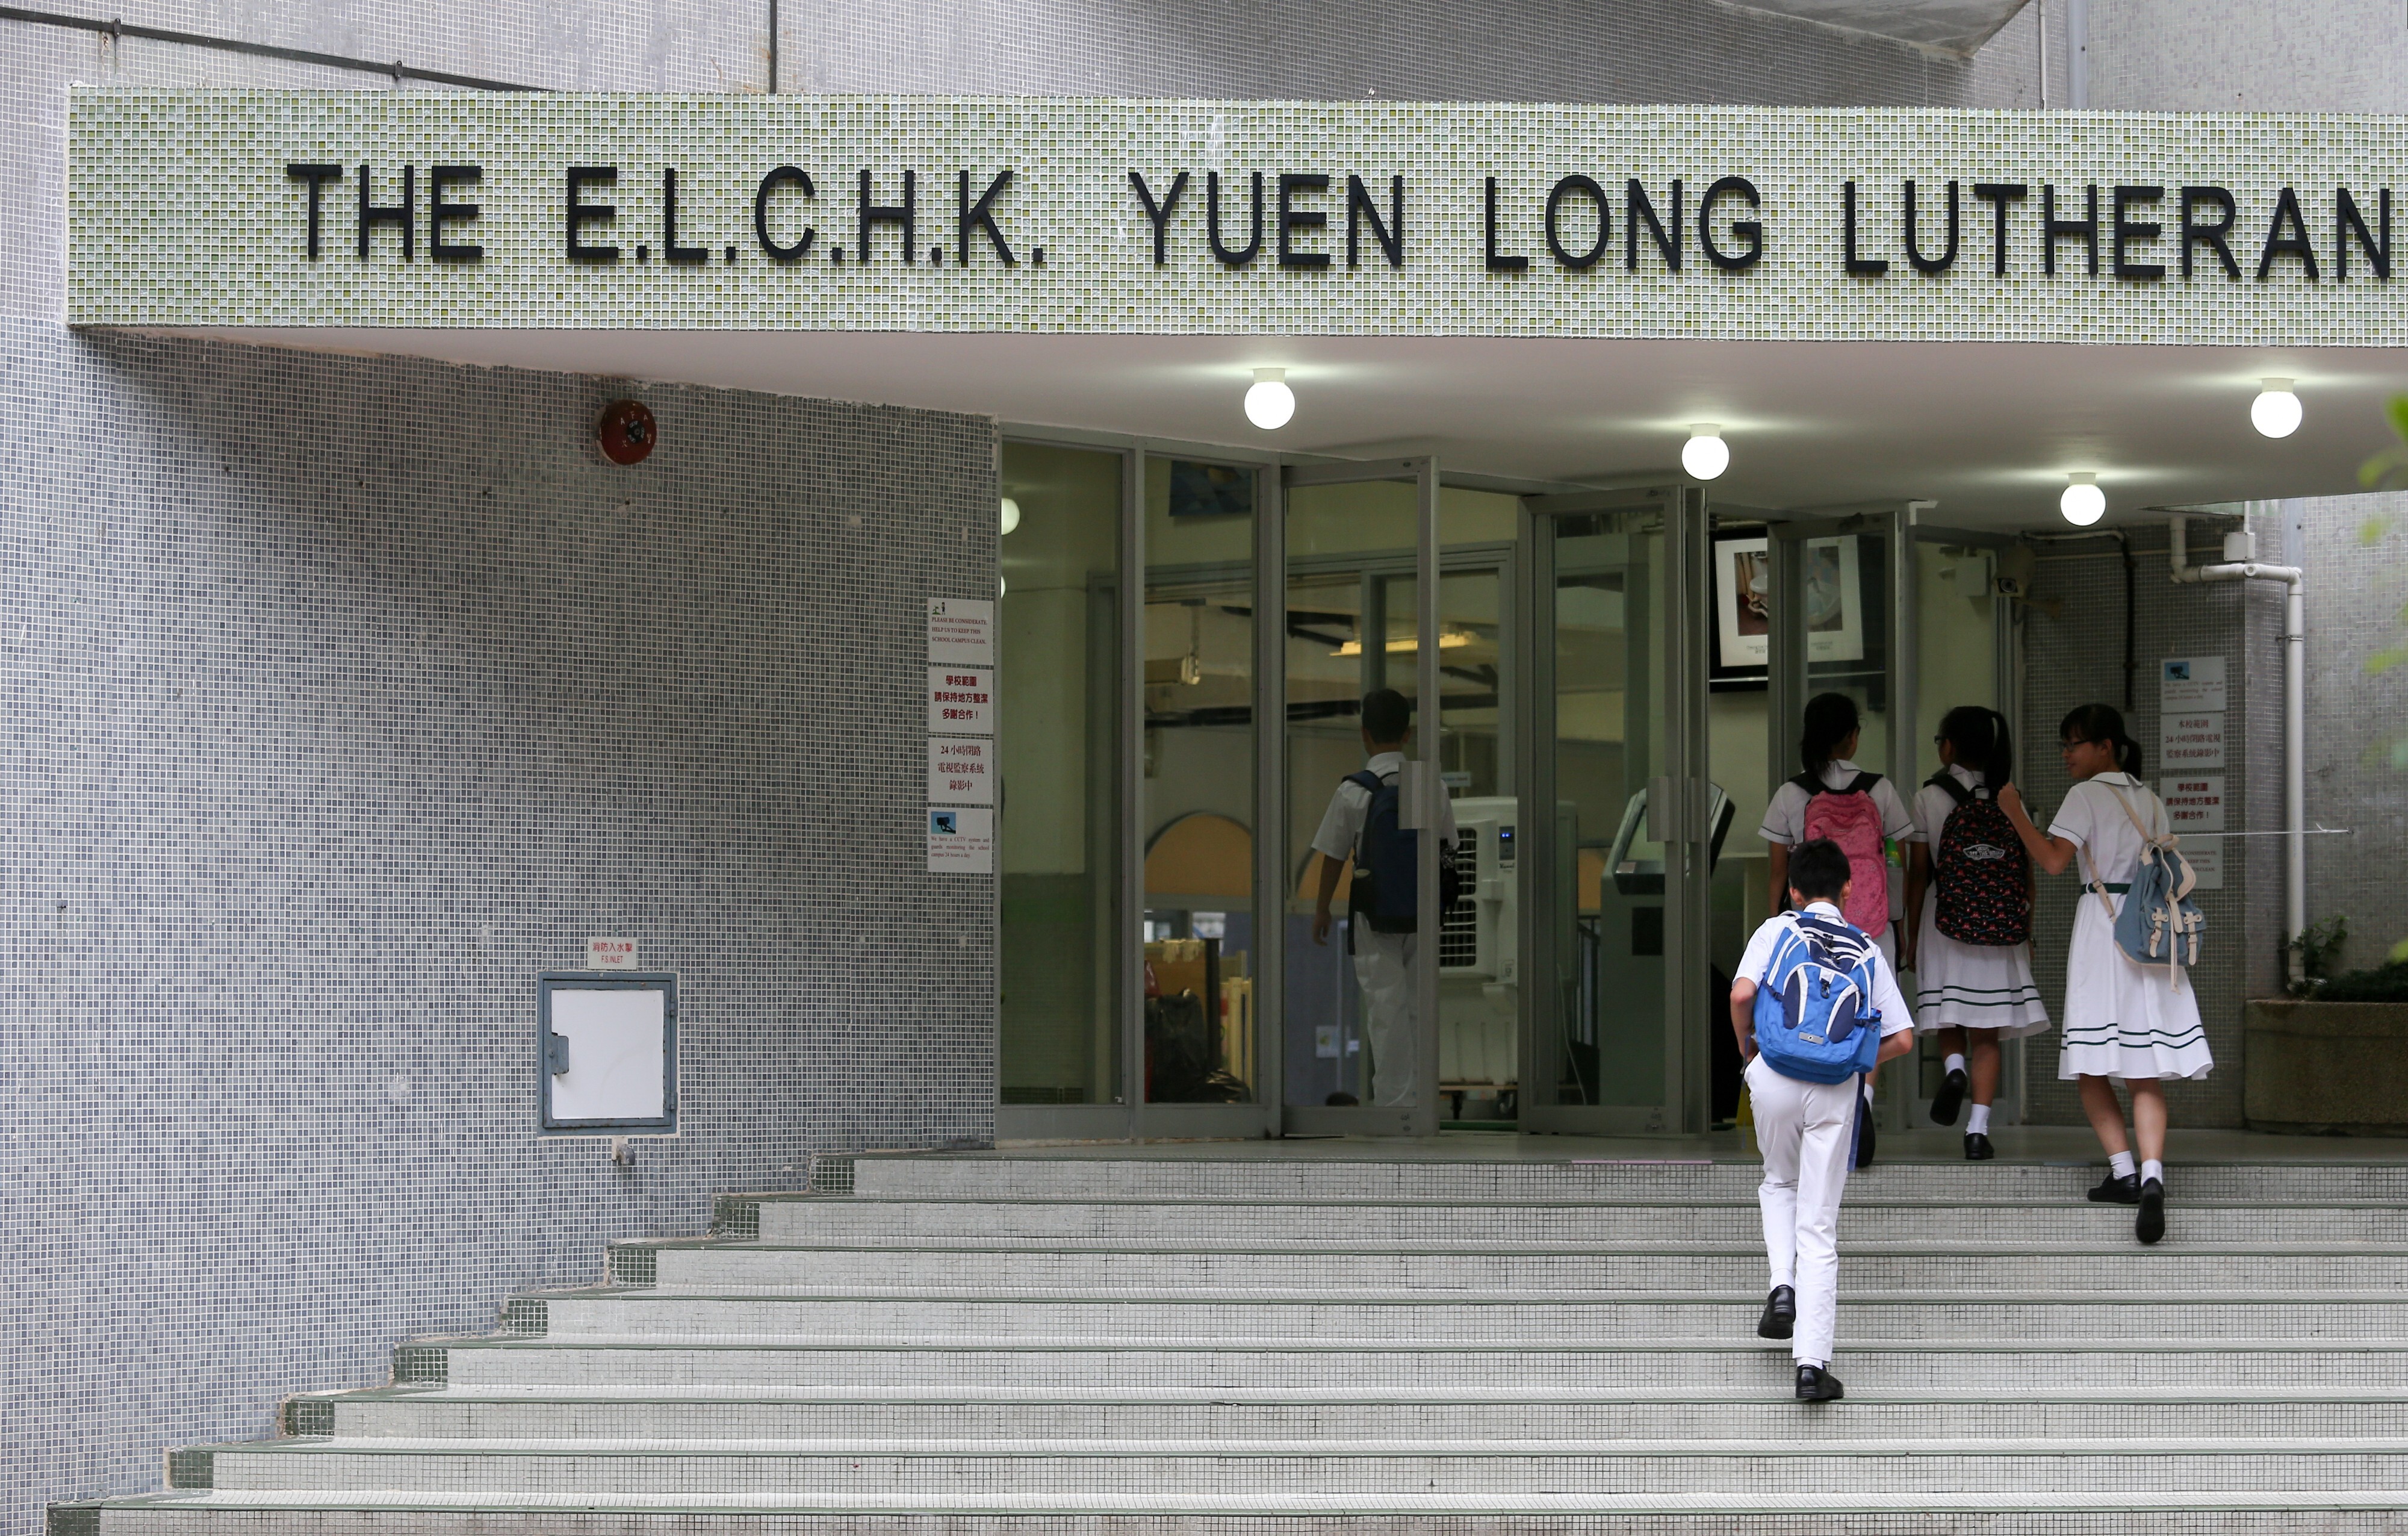 The two students attend the ELCHK Yuen Long Lutheran Secondary School. Photo: K. Y. Cheng